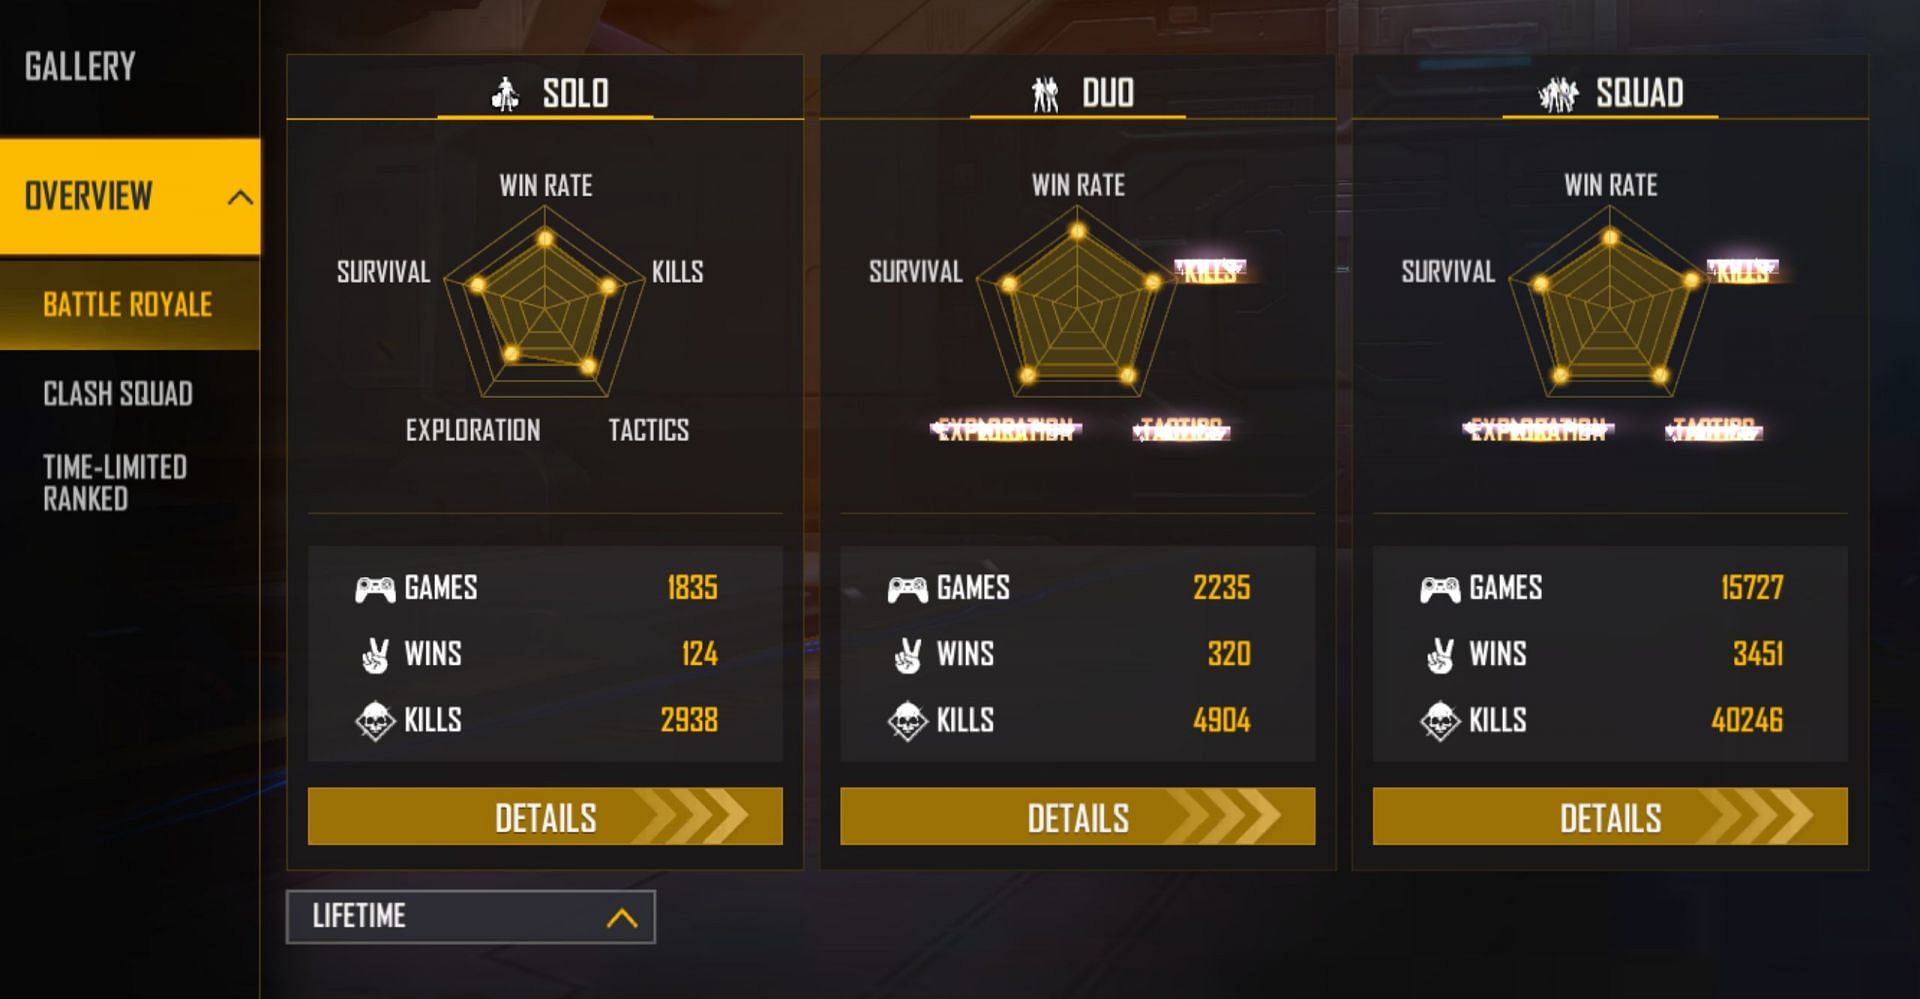 He has maintained good lifetime stats in the battle royale (Image via Garena)